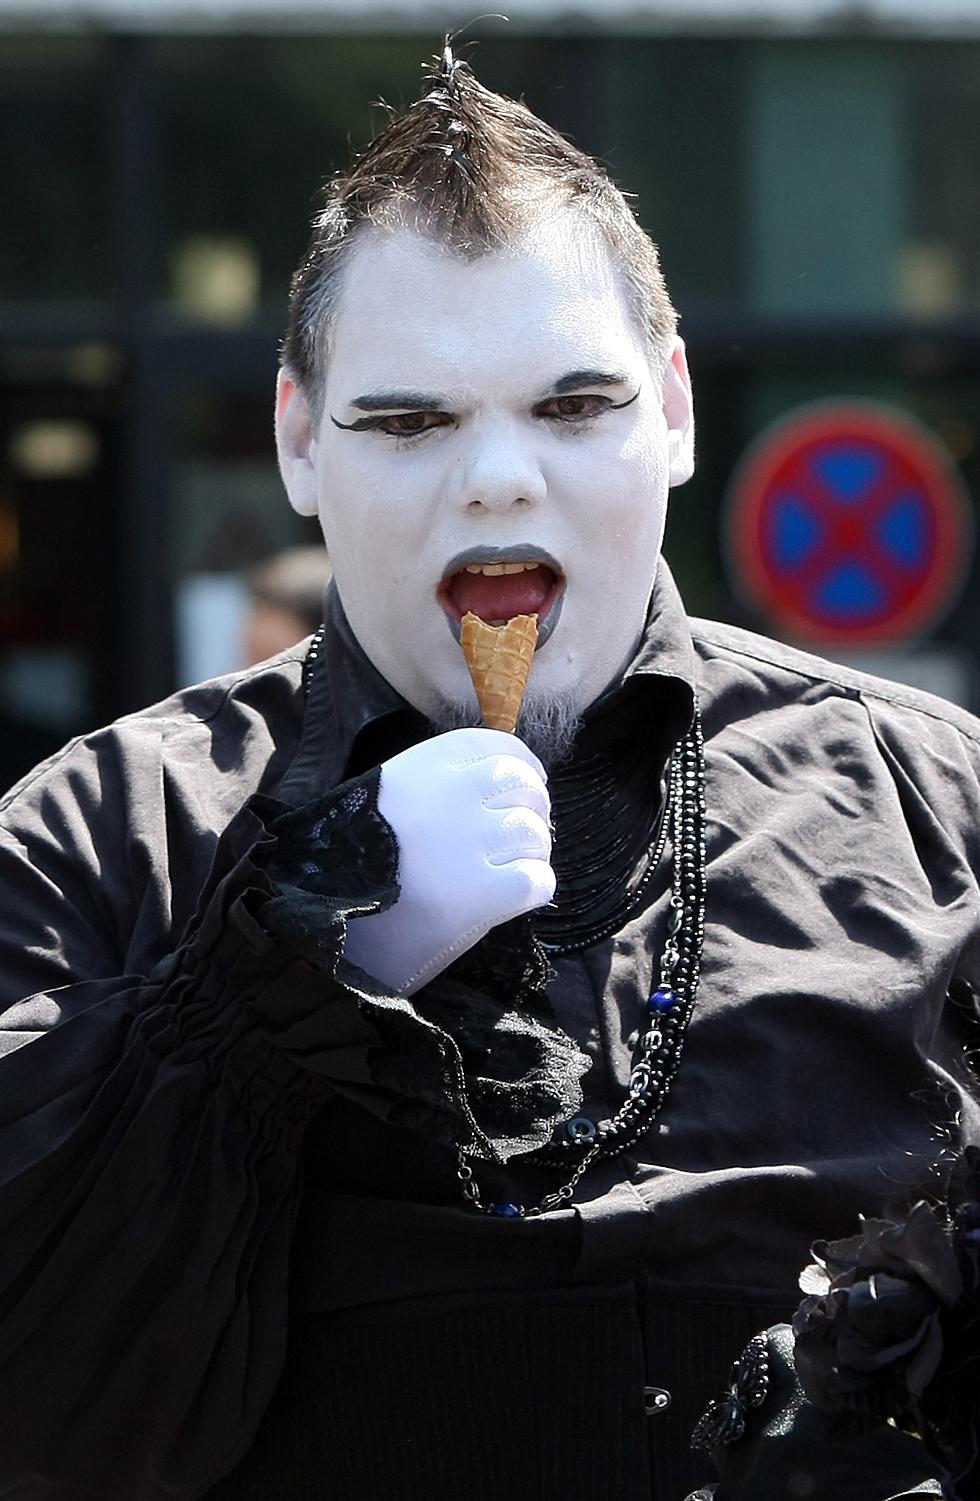 This Ice Cream Flavor Will Oddly Appeal to Your Goth Soul